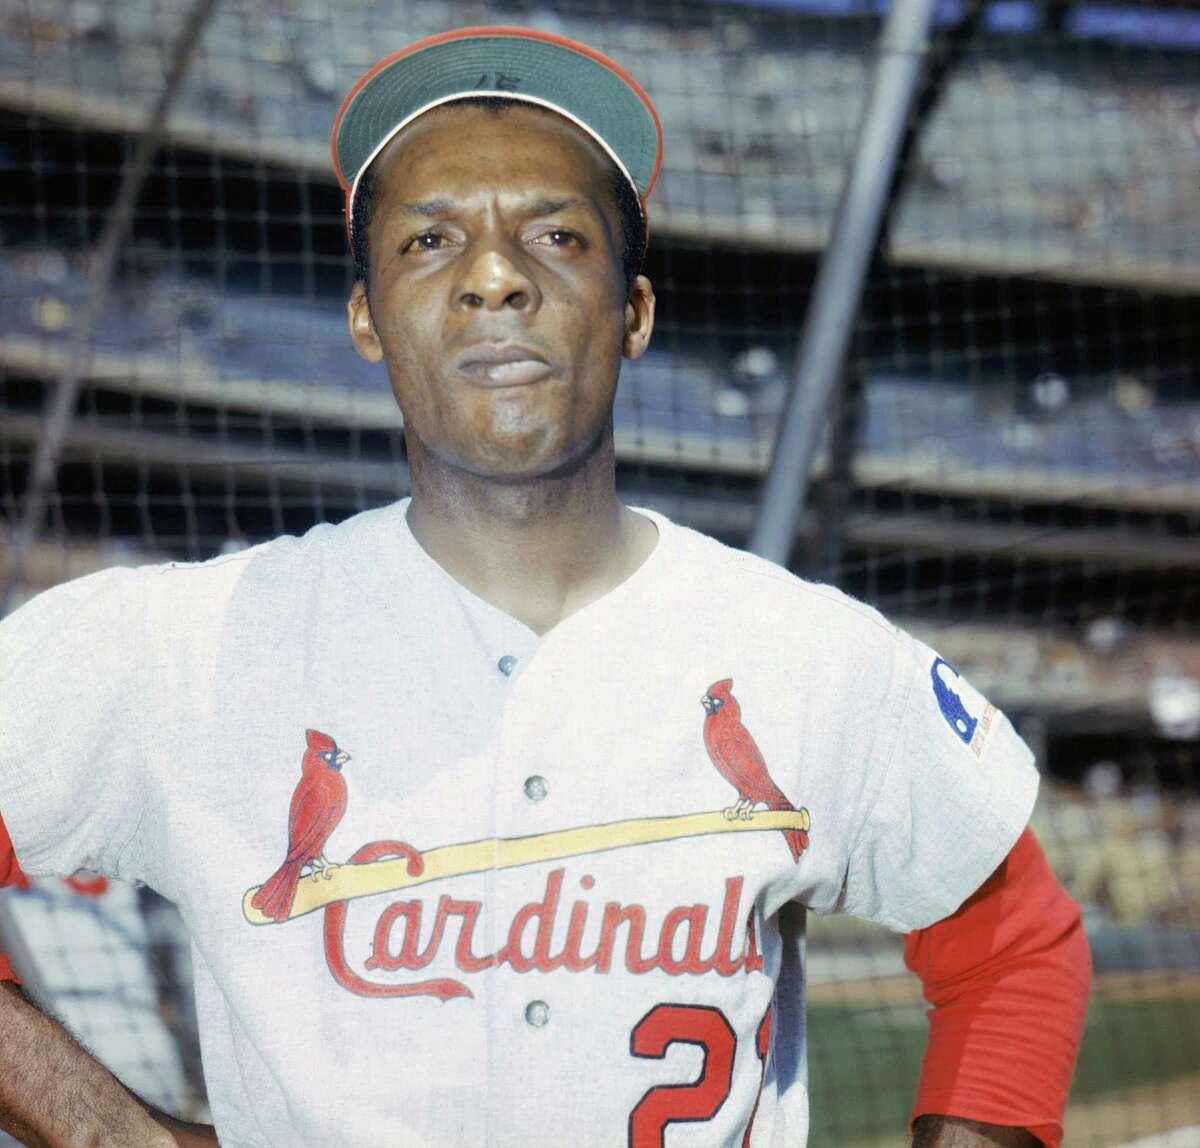 1970: Flood opens the gates While longtime St. Louis Cardinals outfielder Curt Flood didn't actually sign a free-agent contract during his 15-year career, his refusal to accept a trade to the moribund Philadelphia Phillies following the 1969 season led to a challenge of Major League Baseball's reserve clause, eventually opening the door for free agency in 1975.